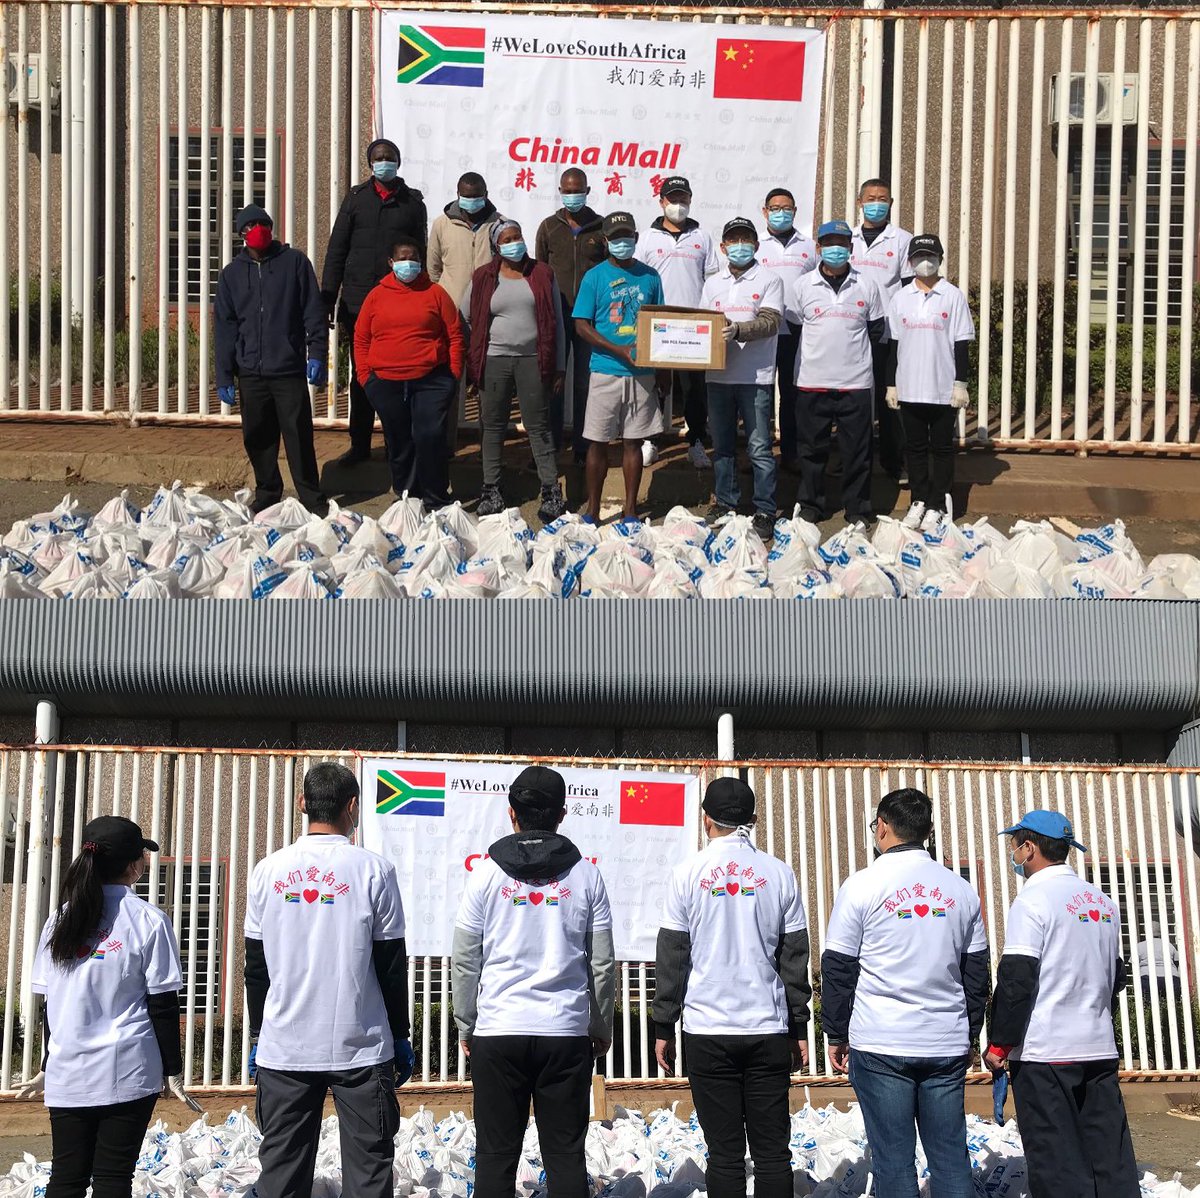 #RacismMustStop #RacismMustFall #welovesouthafrica #ChinaAfrica Chinamall keep support New Canada community with 200 food packs and 500 facial masks💗